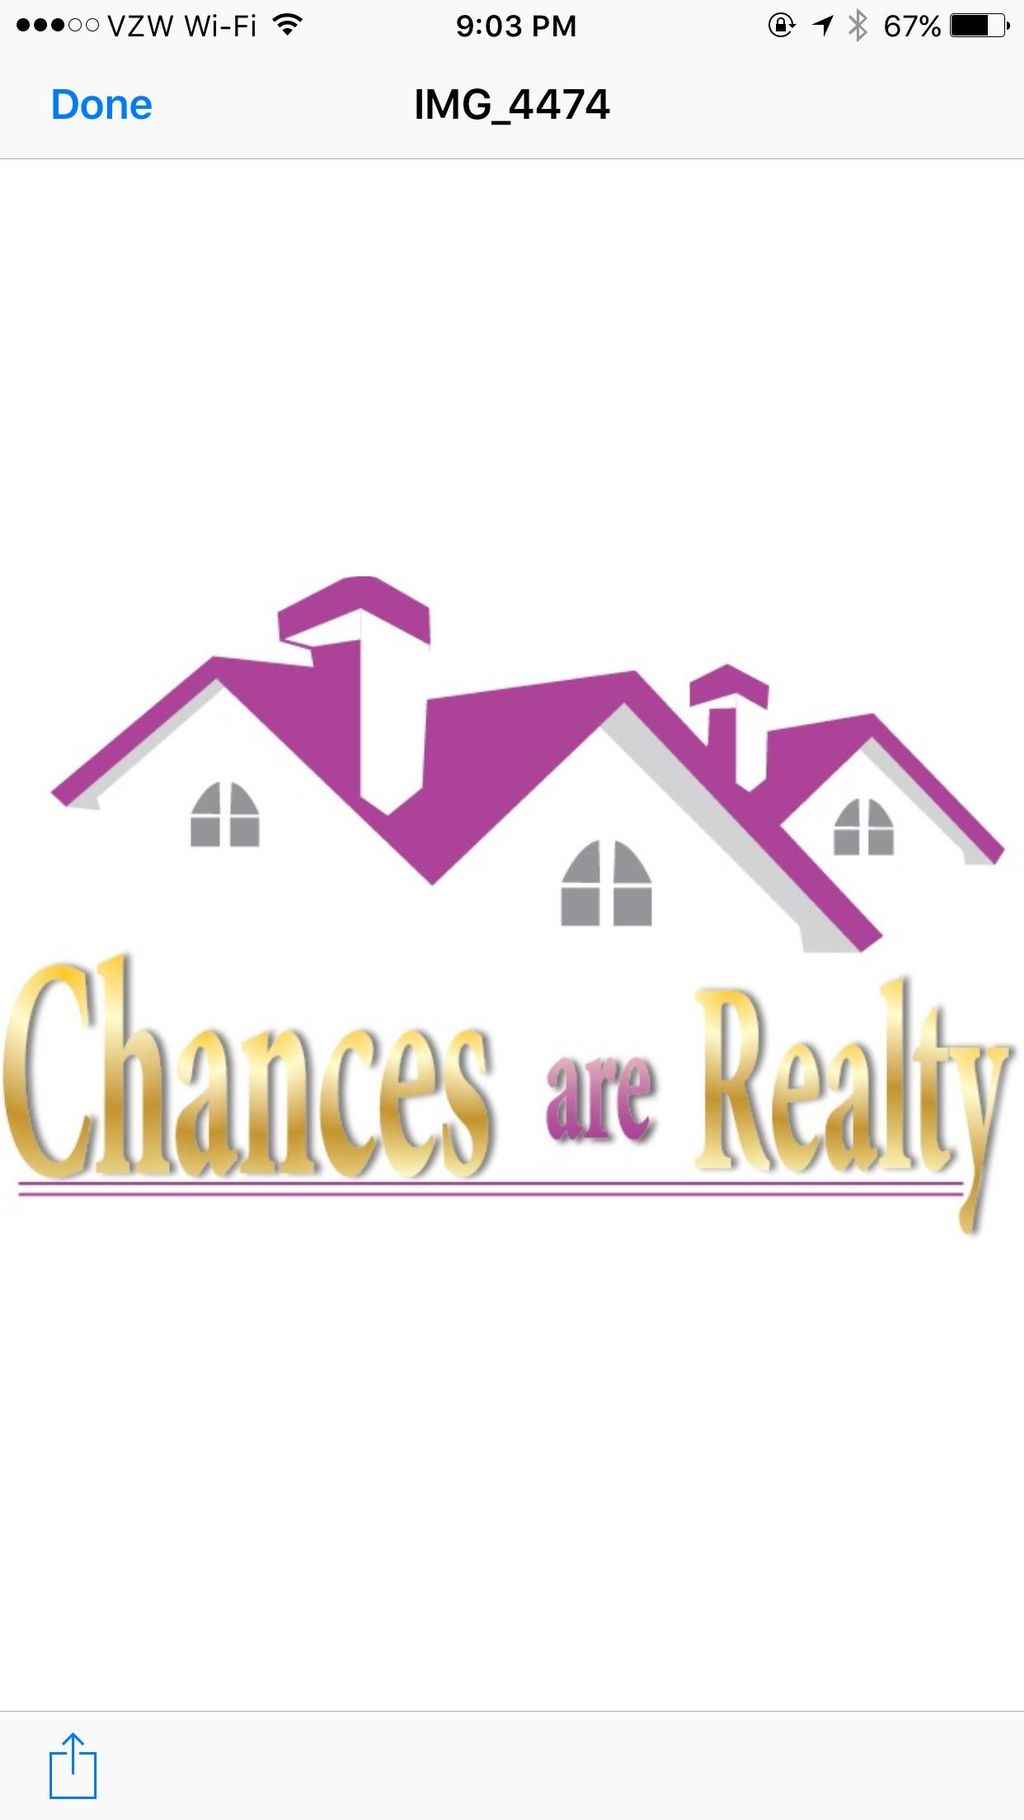 Chances are Realty